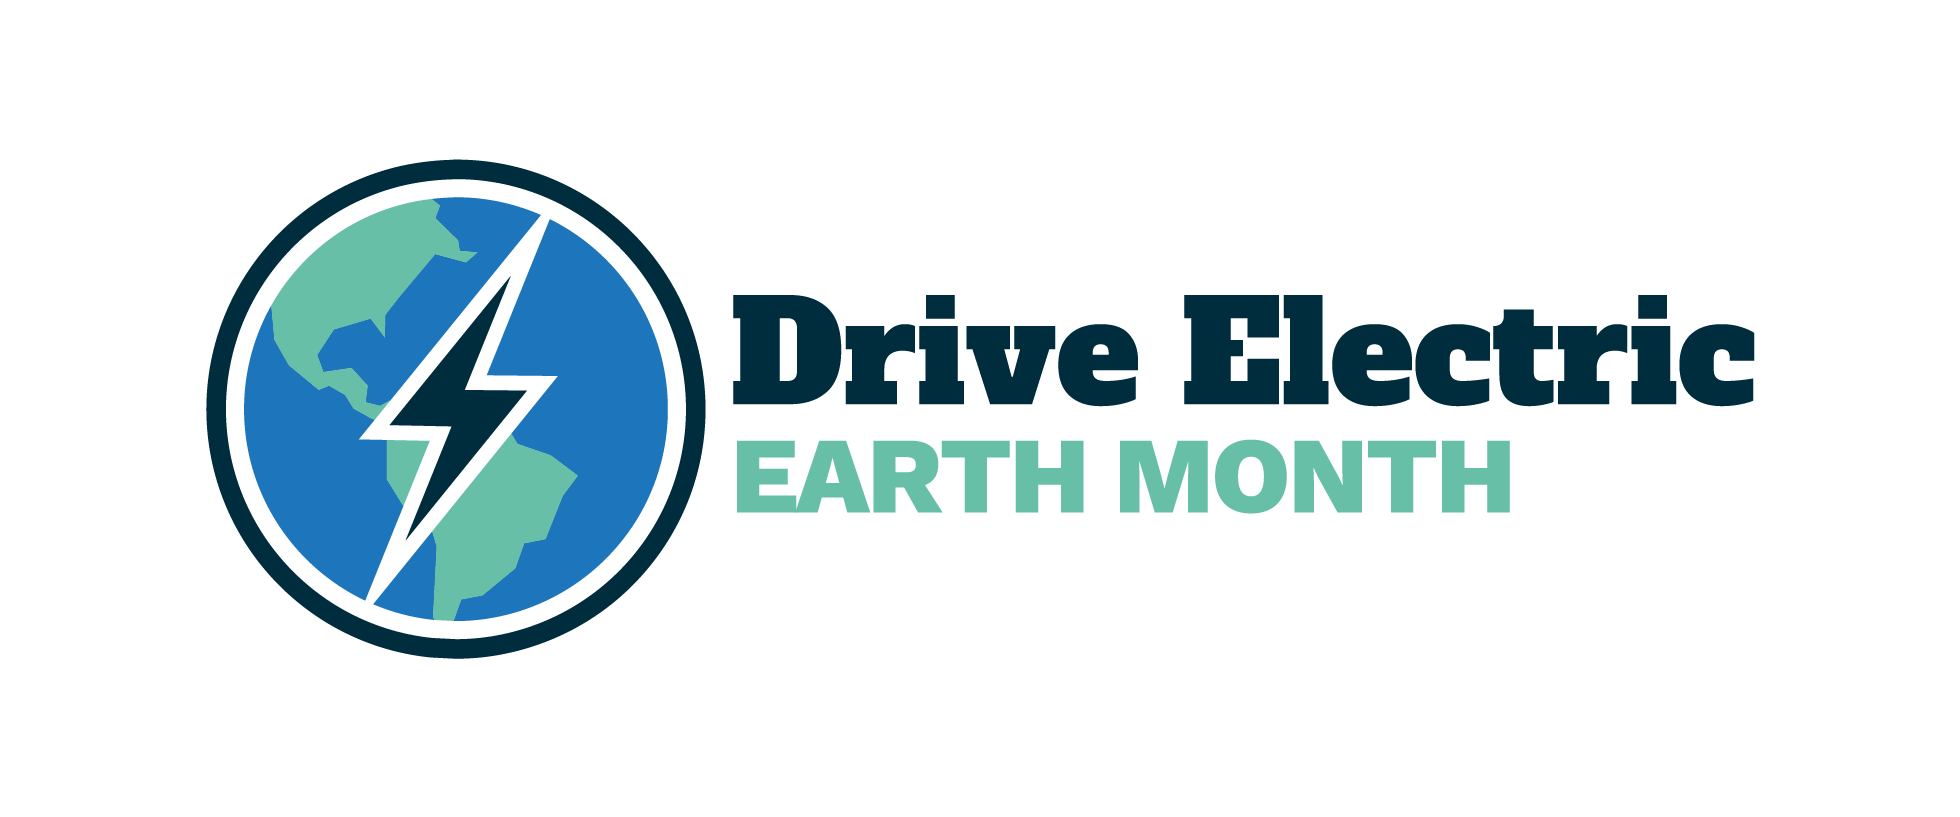 Drive Electric Earth Month